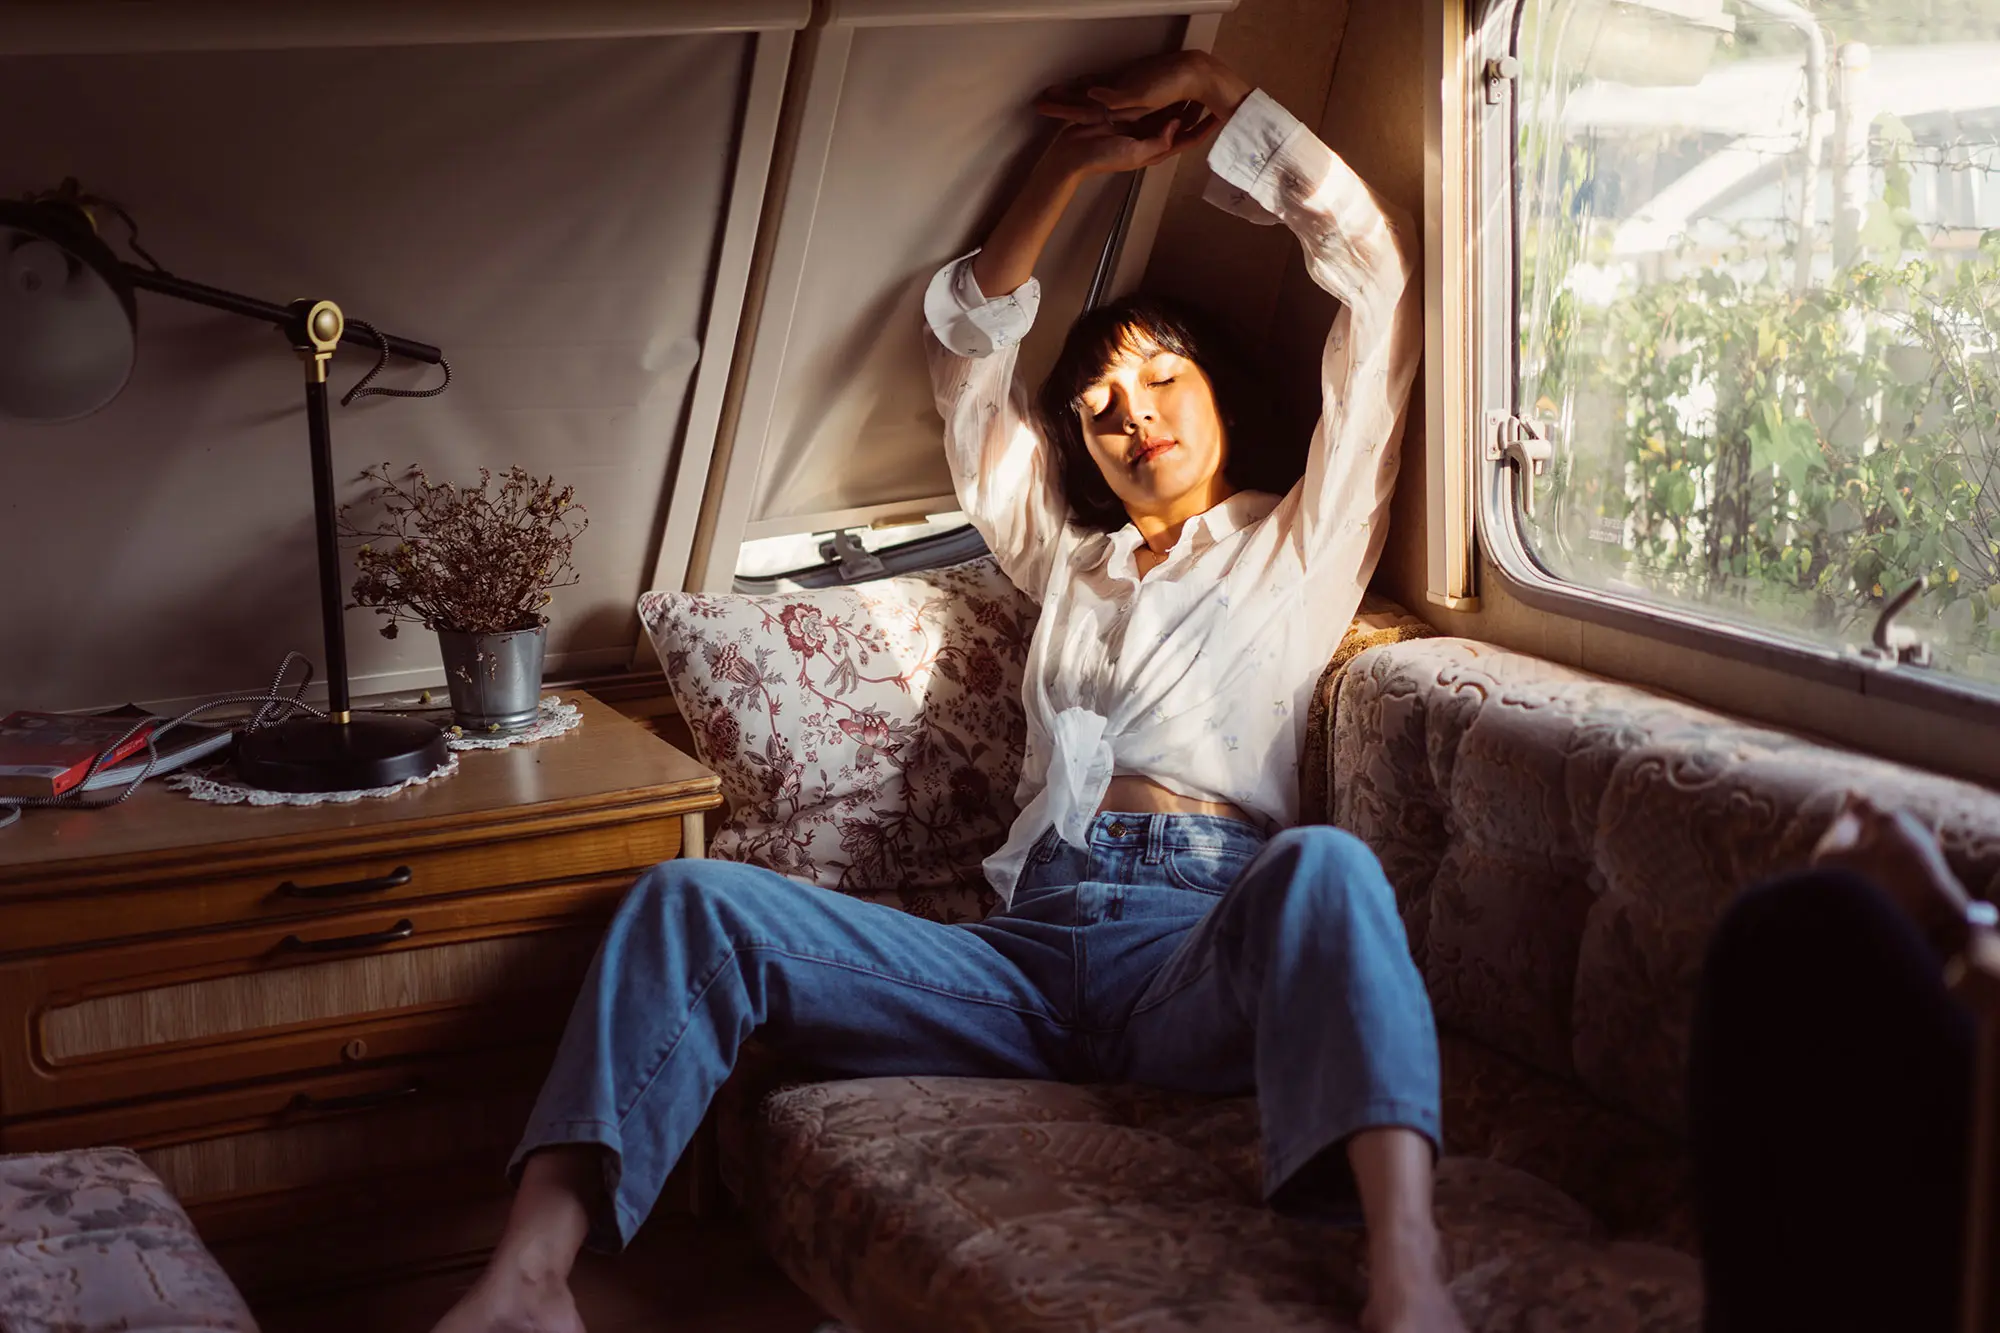 Woman bathed in light in a vintage camper wearing jeans, stretching with closed eyes. AW380